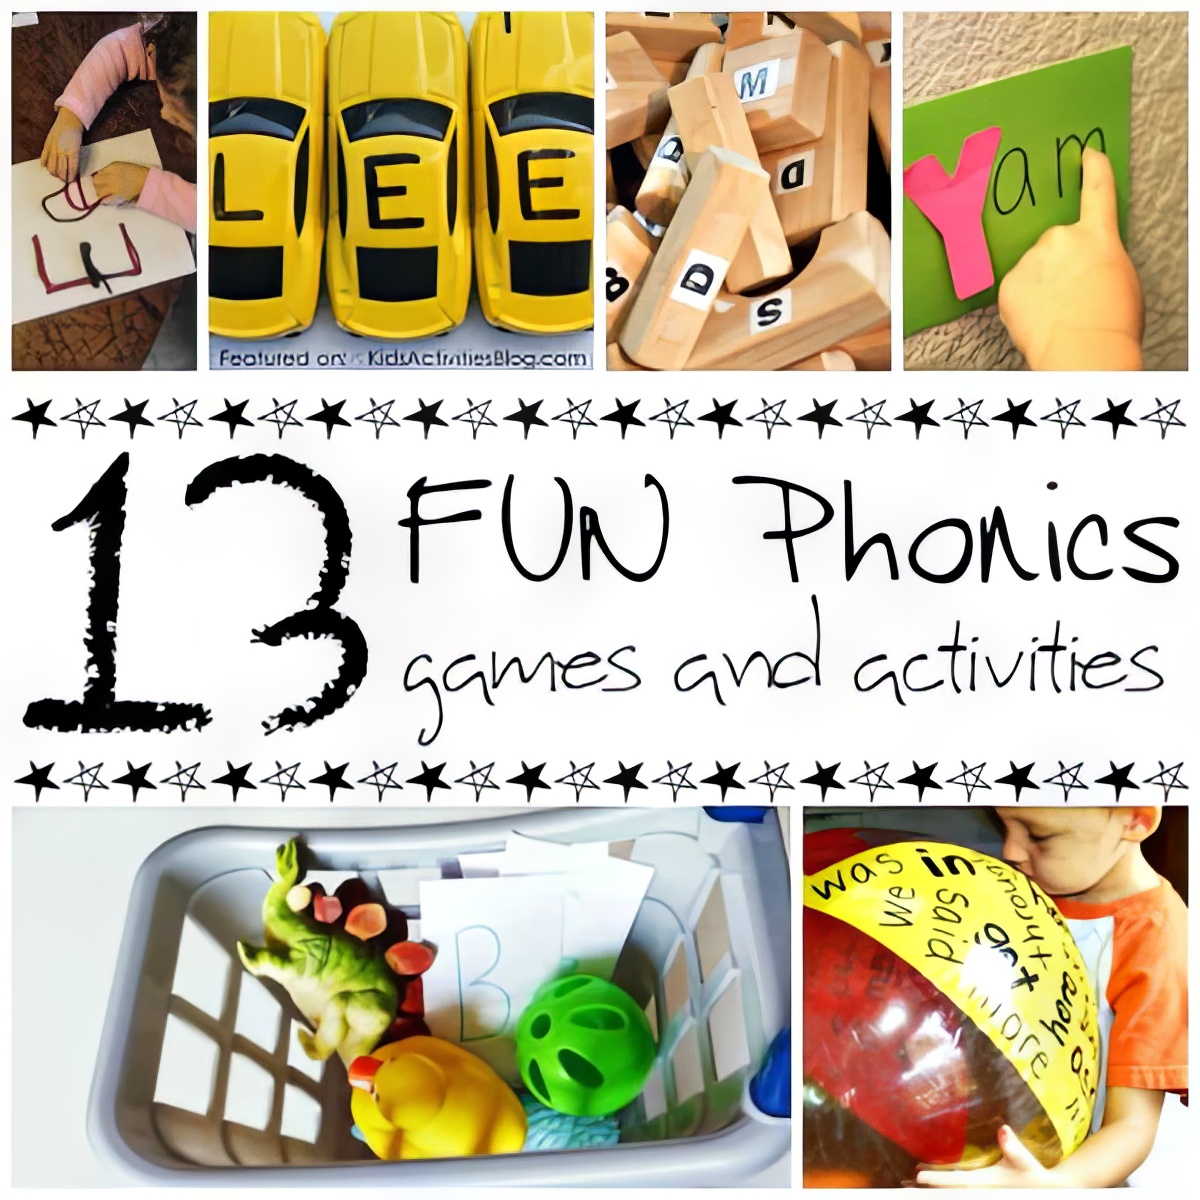 Phonics Games and Activities for toddlers, phonics activities for your kids